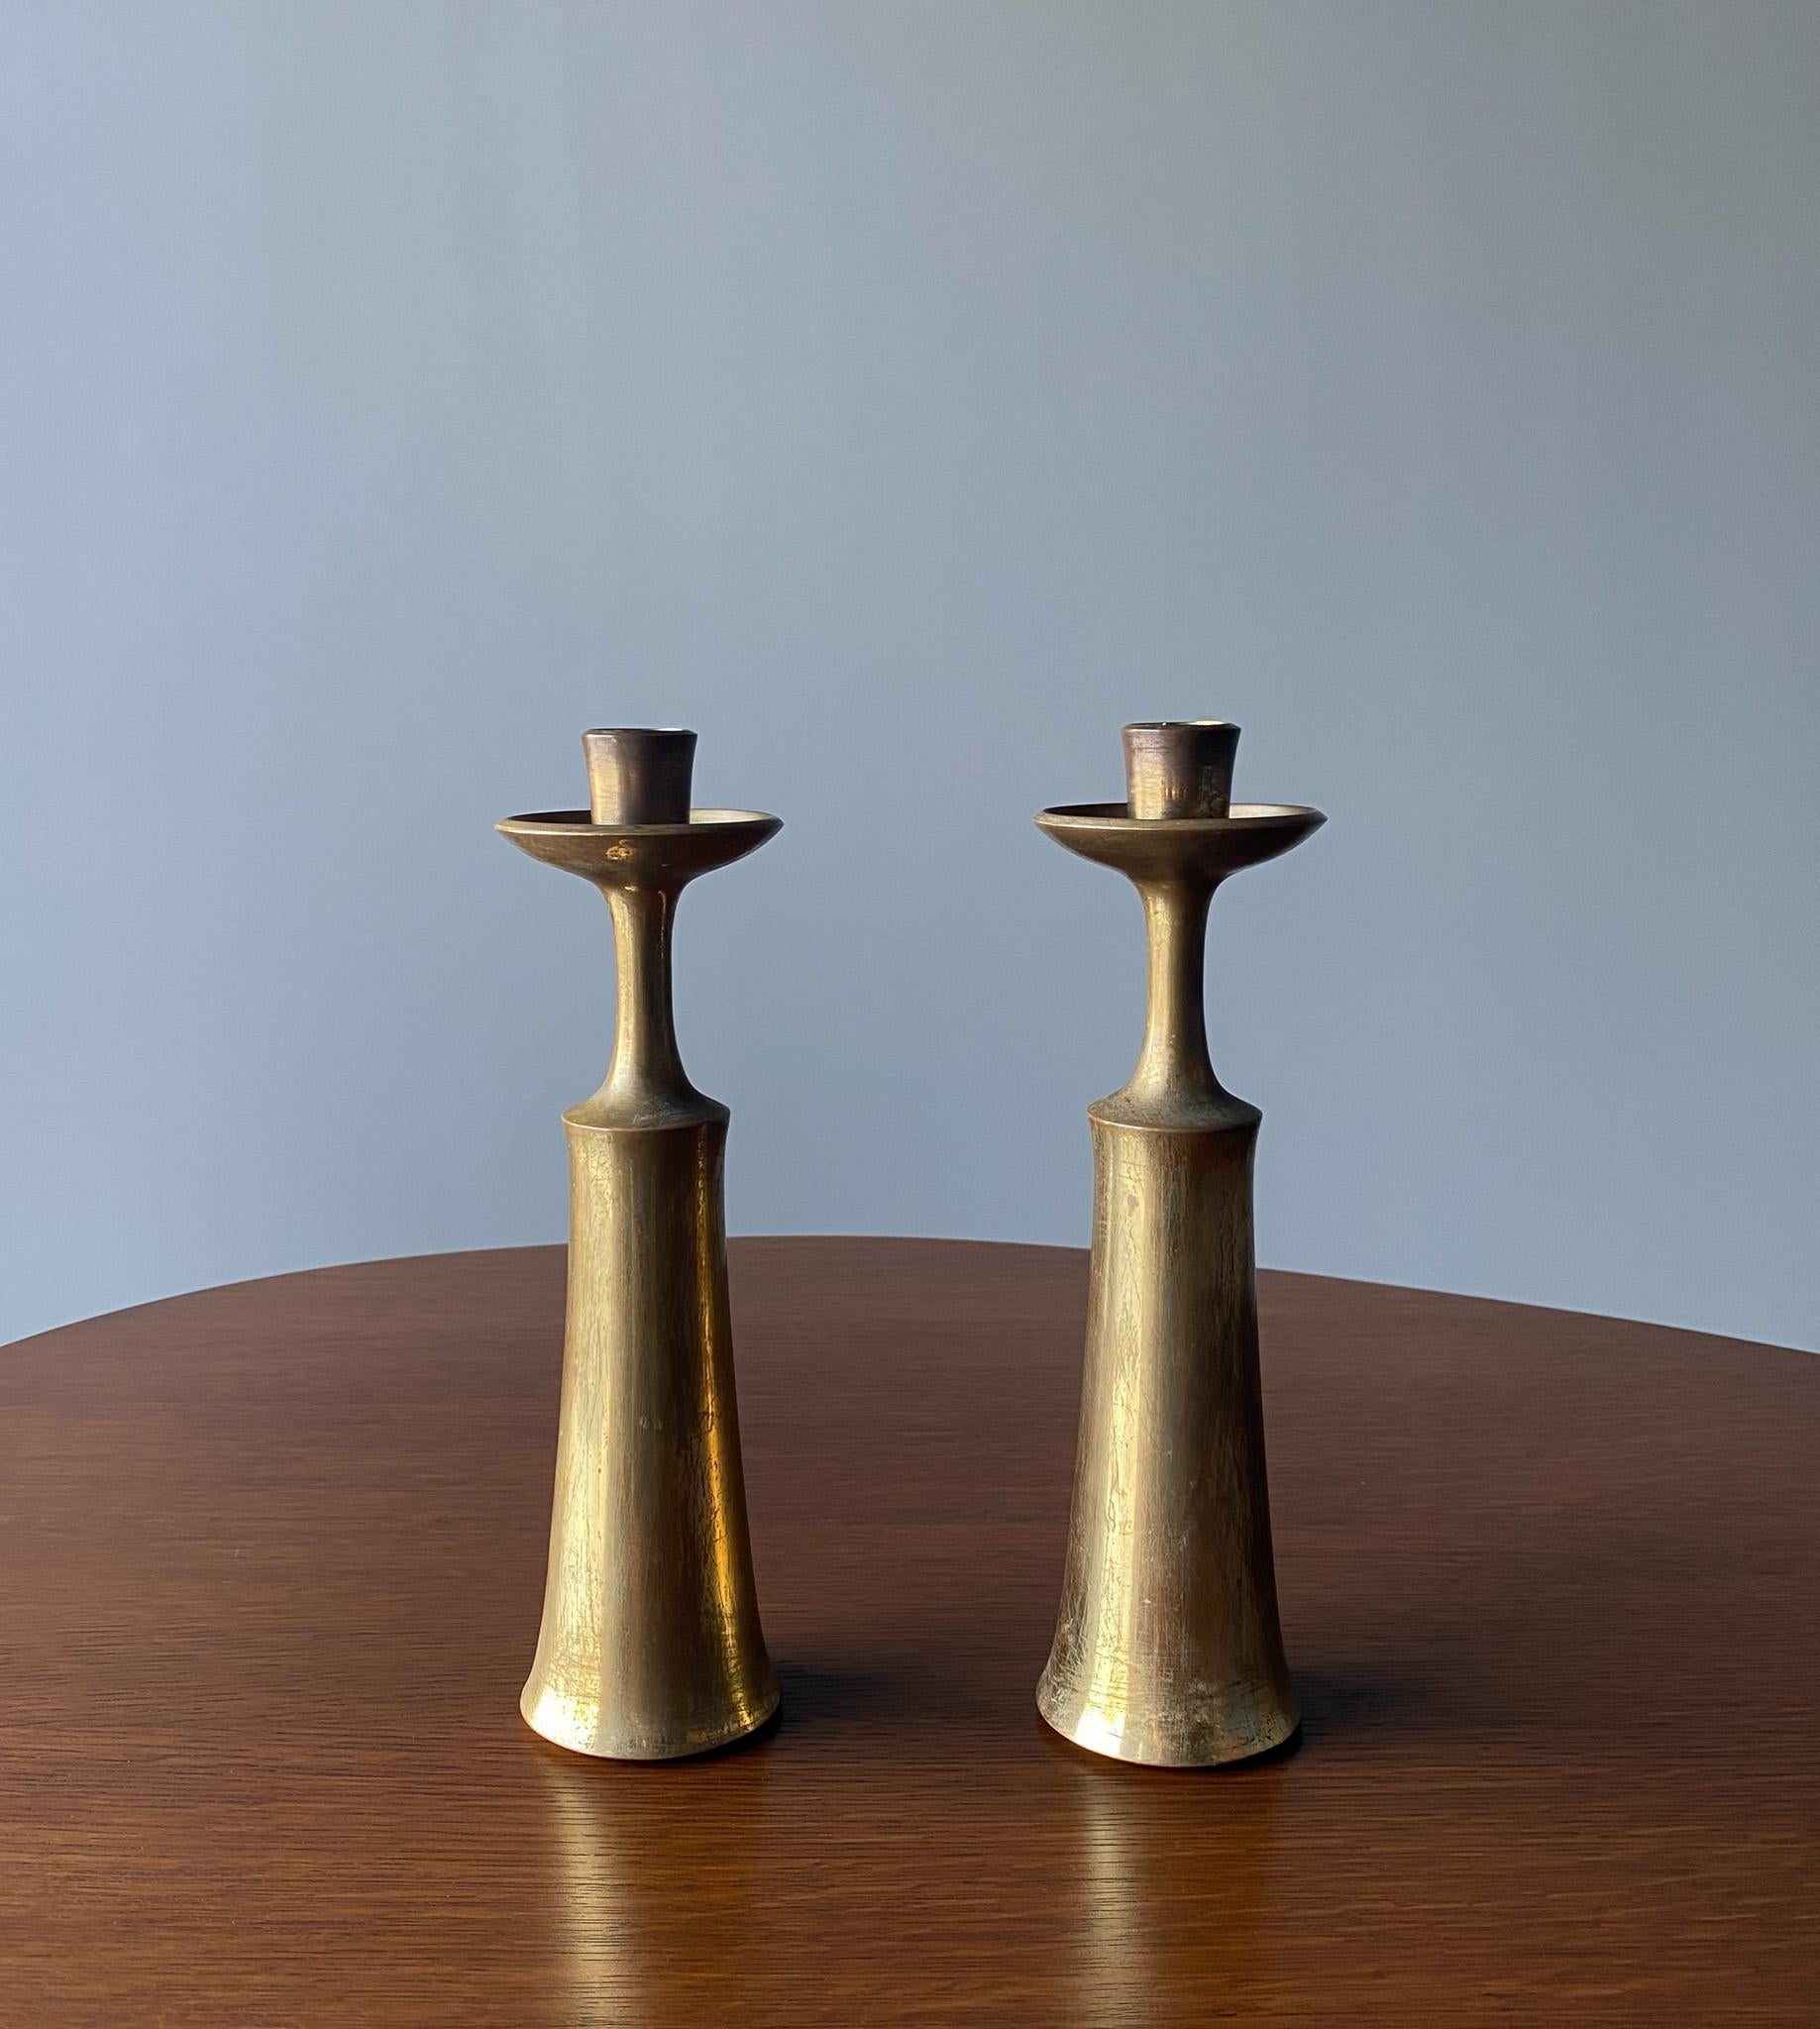 Jens H. Quistgaard Brass Candlesticks for Dansk Designs, Denmark, 1960s.  Nice original patina.  Each signed with makers mark to the bottom. 